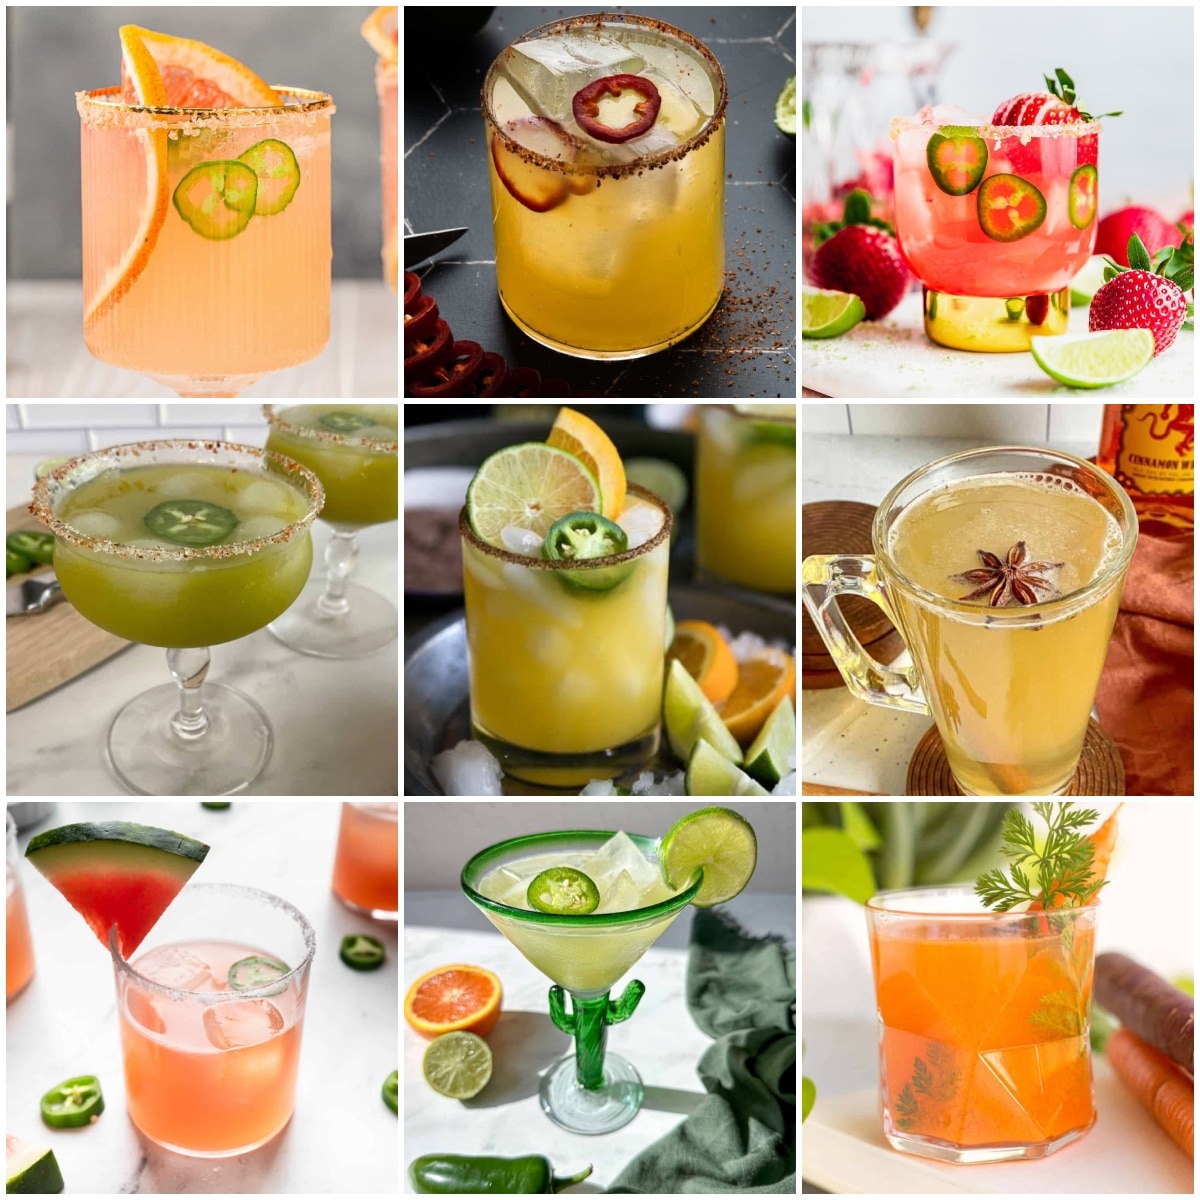 photo collage of spicy cocktails and drinks